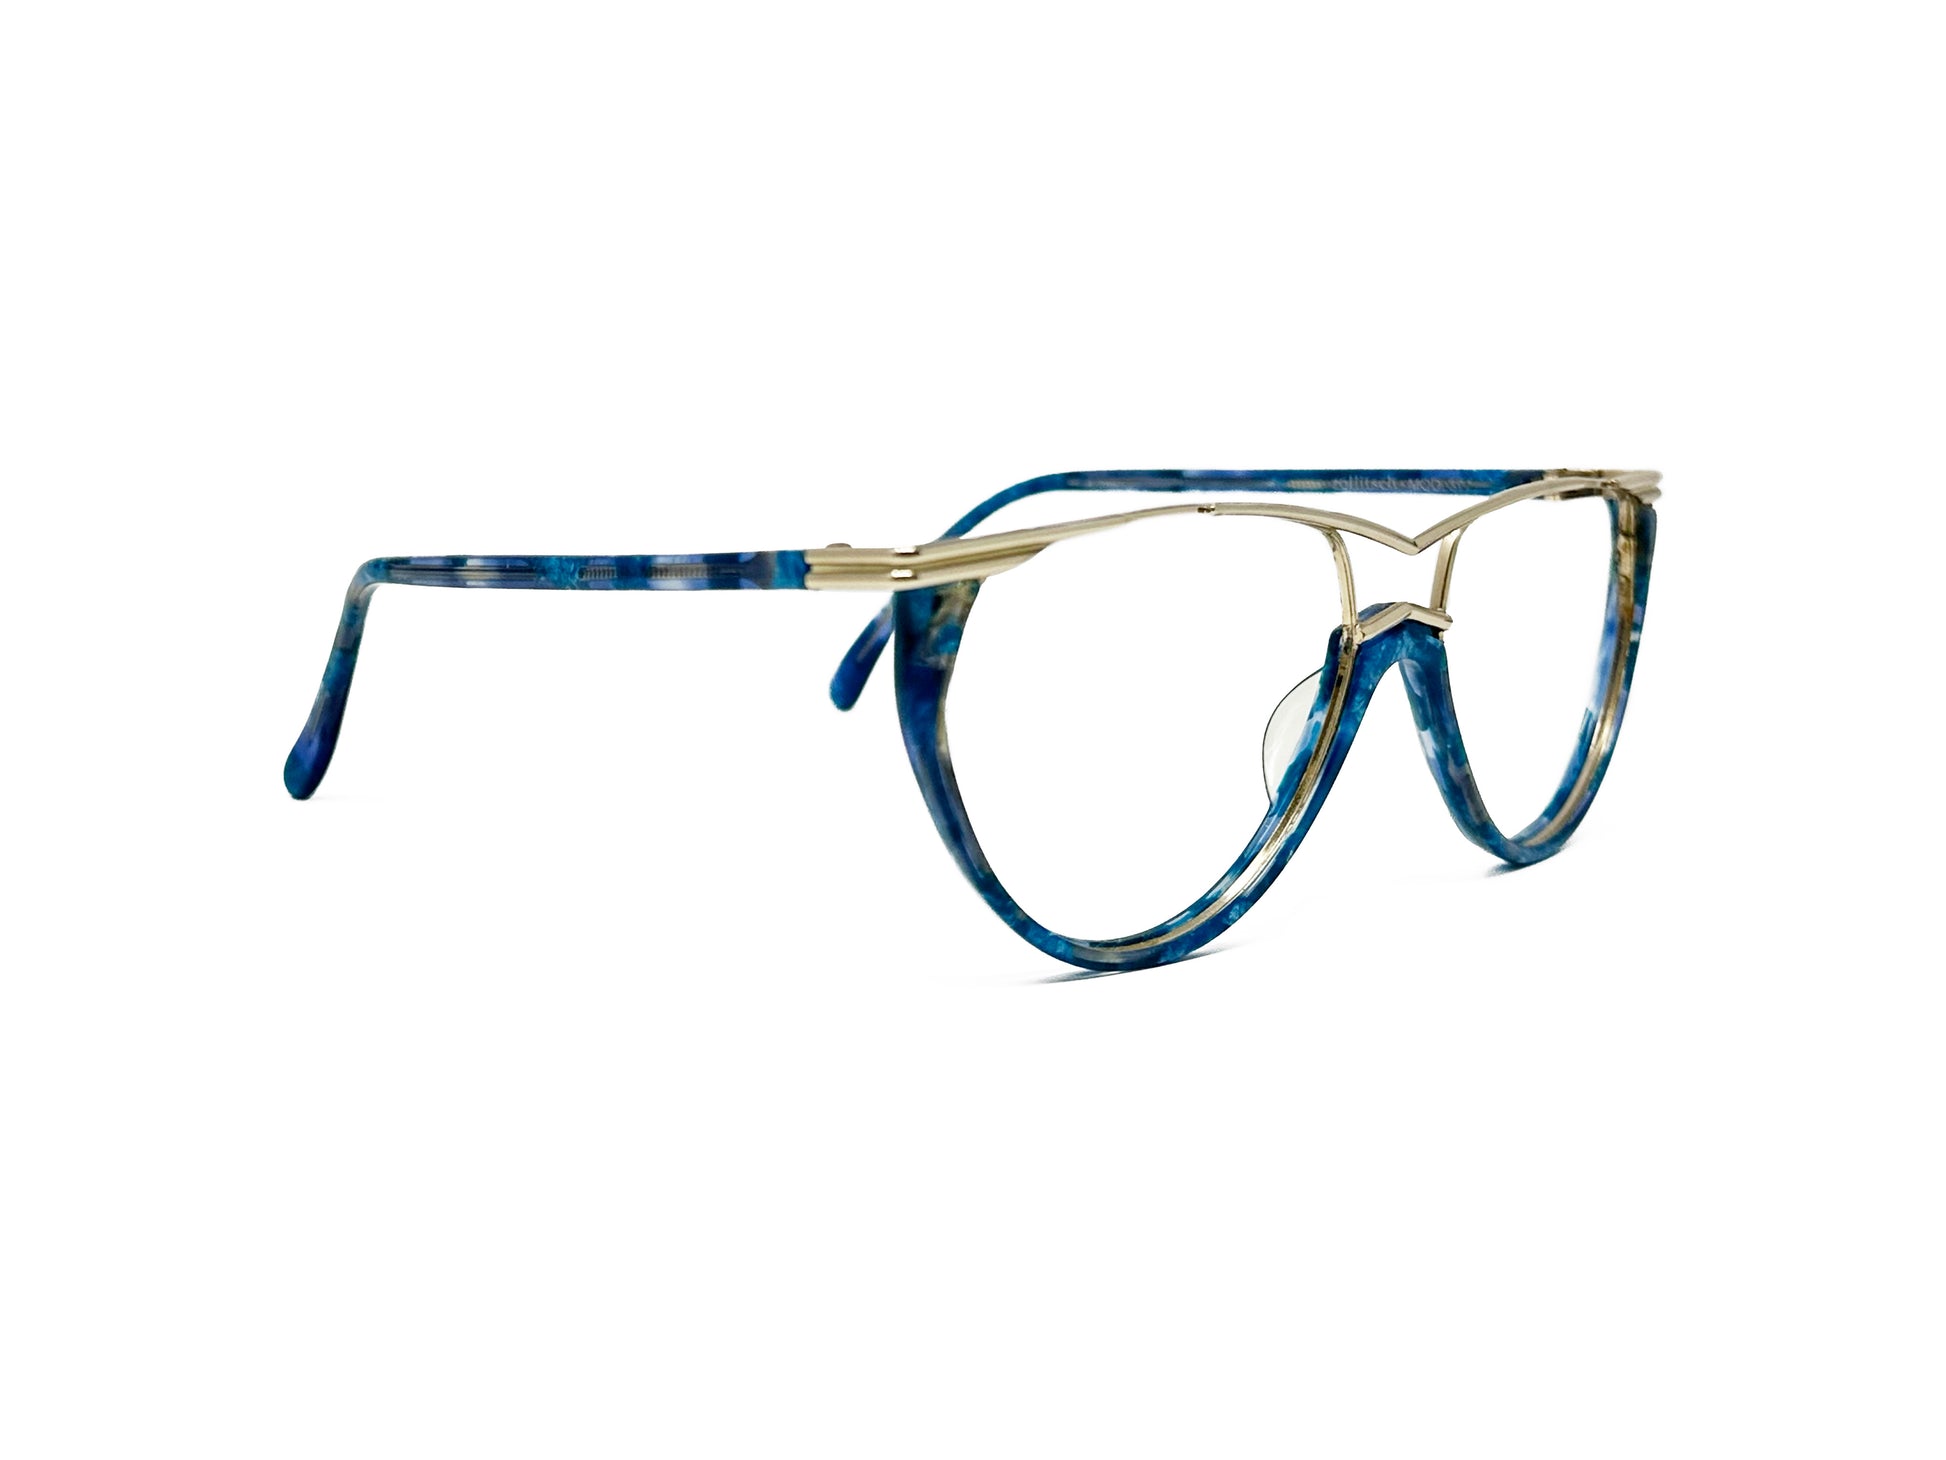 Zollitsch nautical style, metal, optical frame with rounded bottom and flat-top with curved dip above bridge. Model: 377. Color: BL - Blue swirl with gold metal flat-top. Side view.